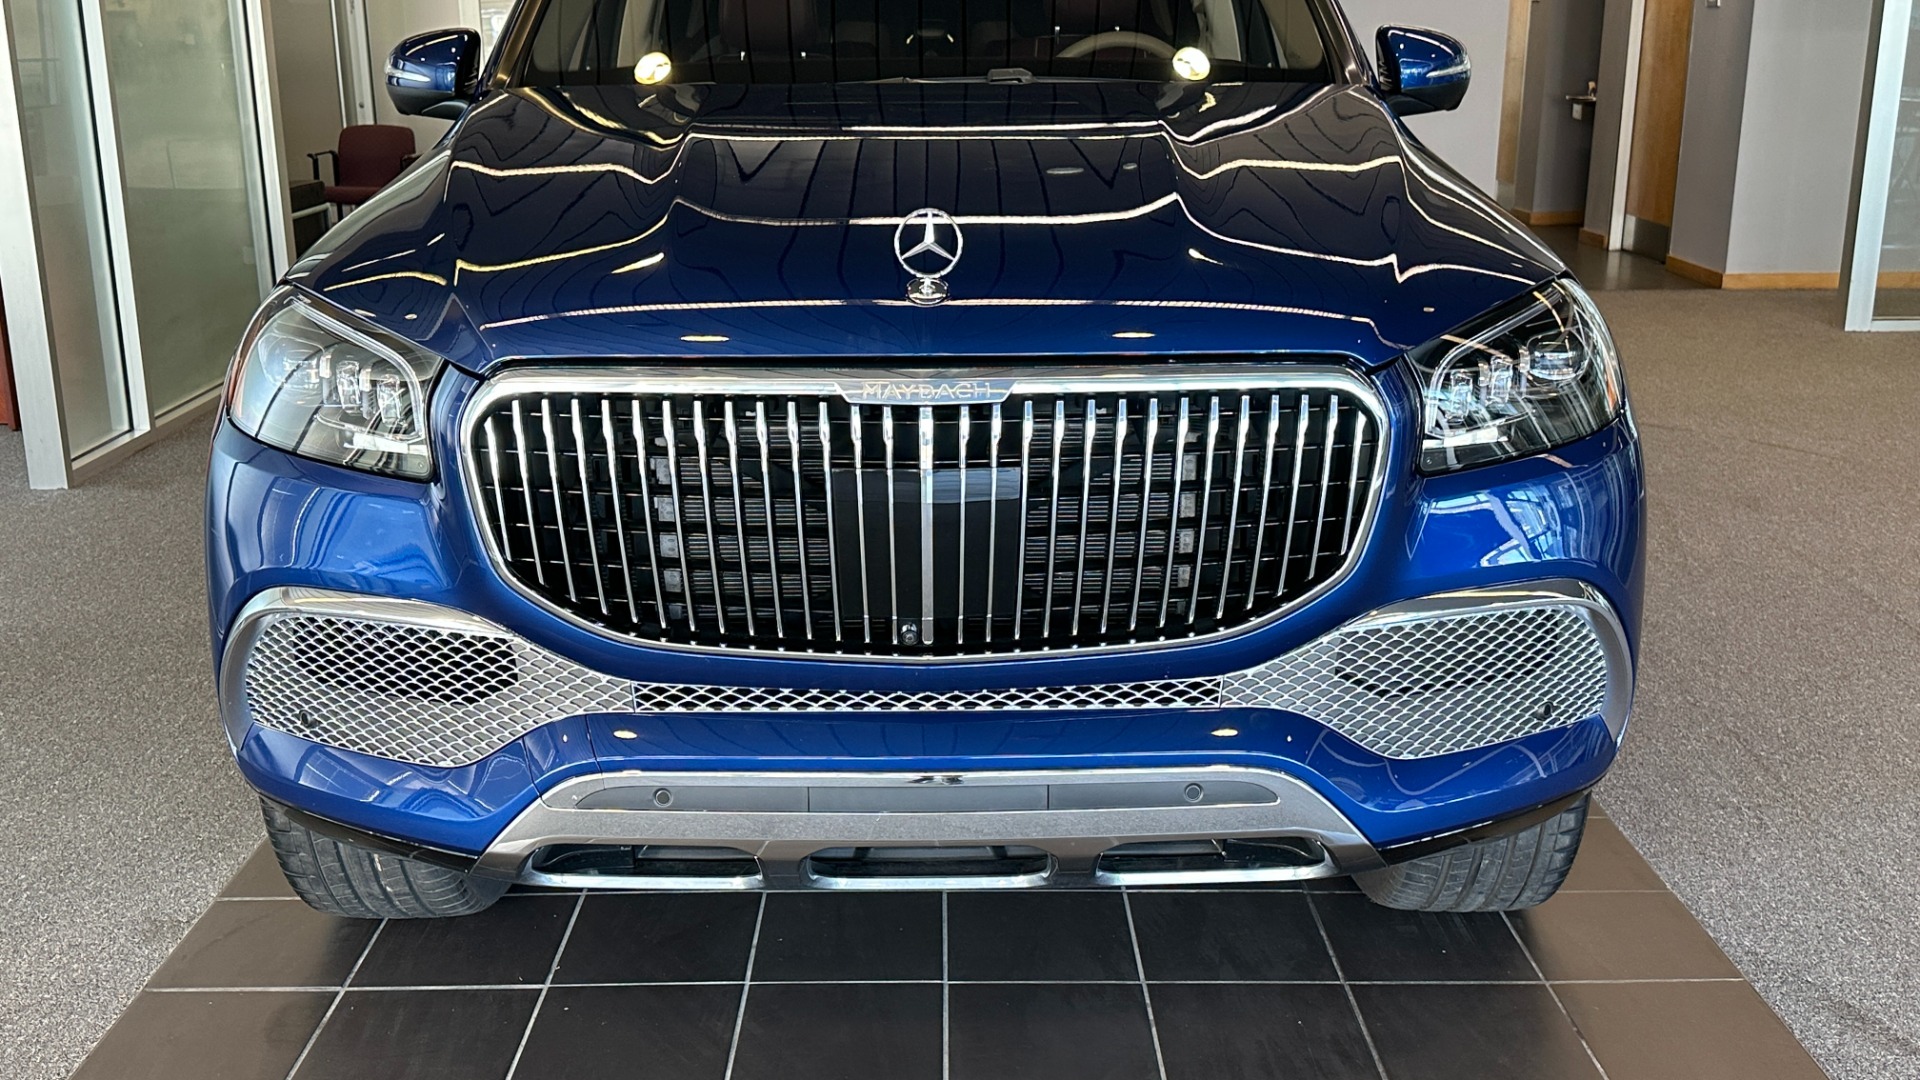 Used 2021 Mercedes-Benz GLS MAYBACH GLS600 / 23IN WHEELS / PIANO BLACK TRIM / CHAMPAGNE FRIDGE for sale $216,995 at Formula Imports in Charlotte NC 28227 8